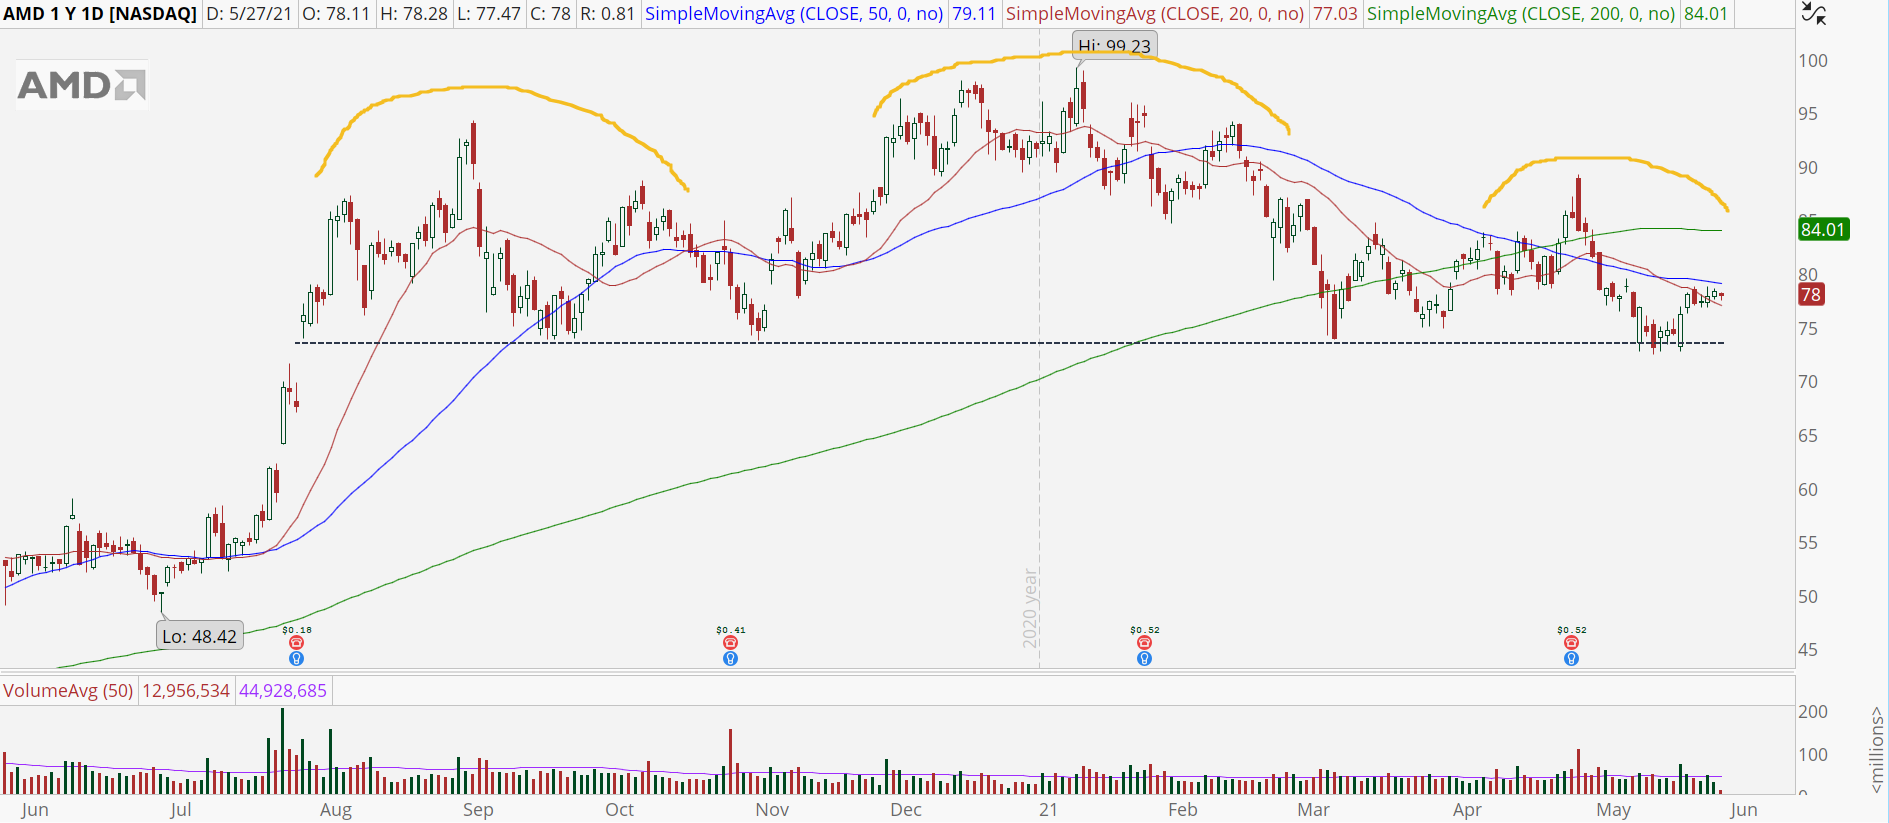 Advanced Micro Devices (AMD) chart with support bounce. 